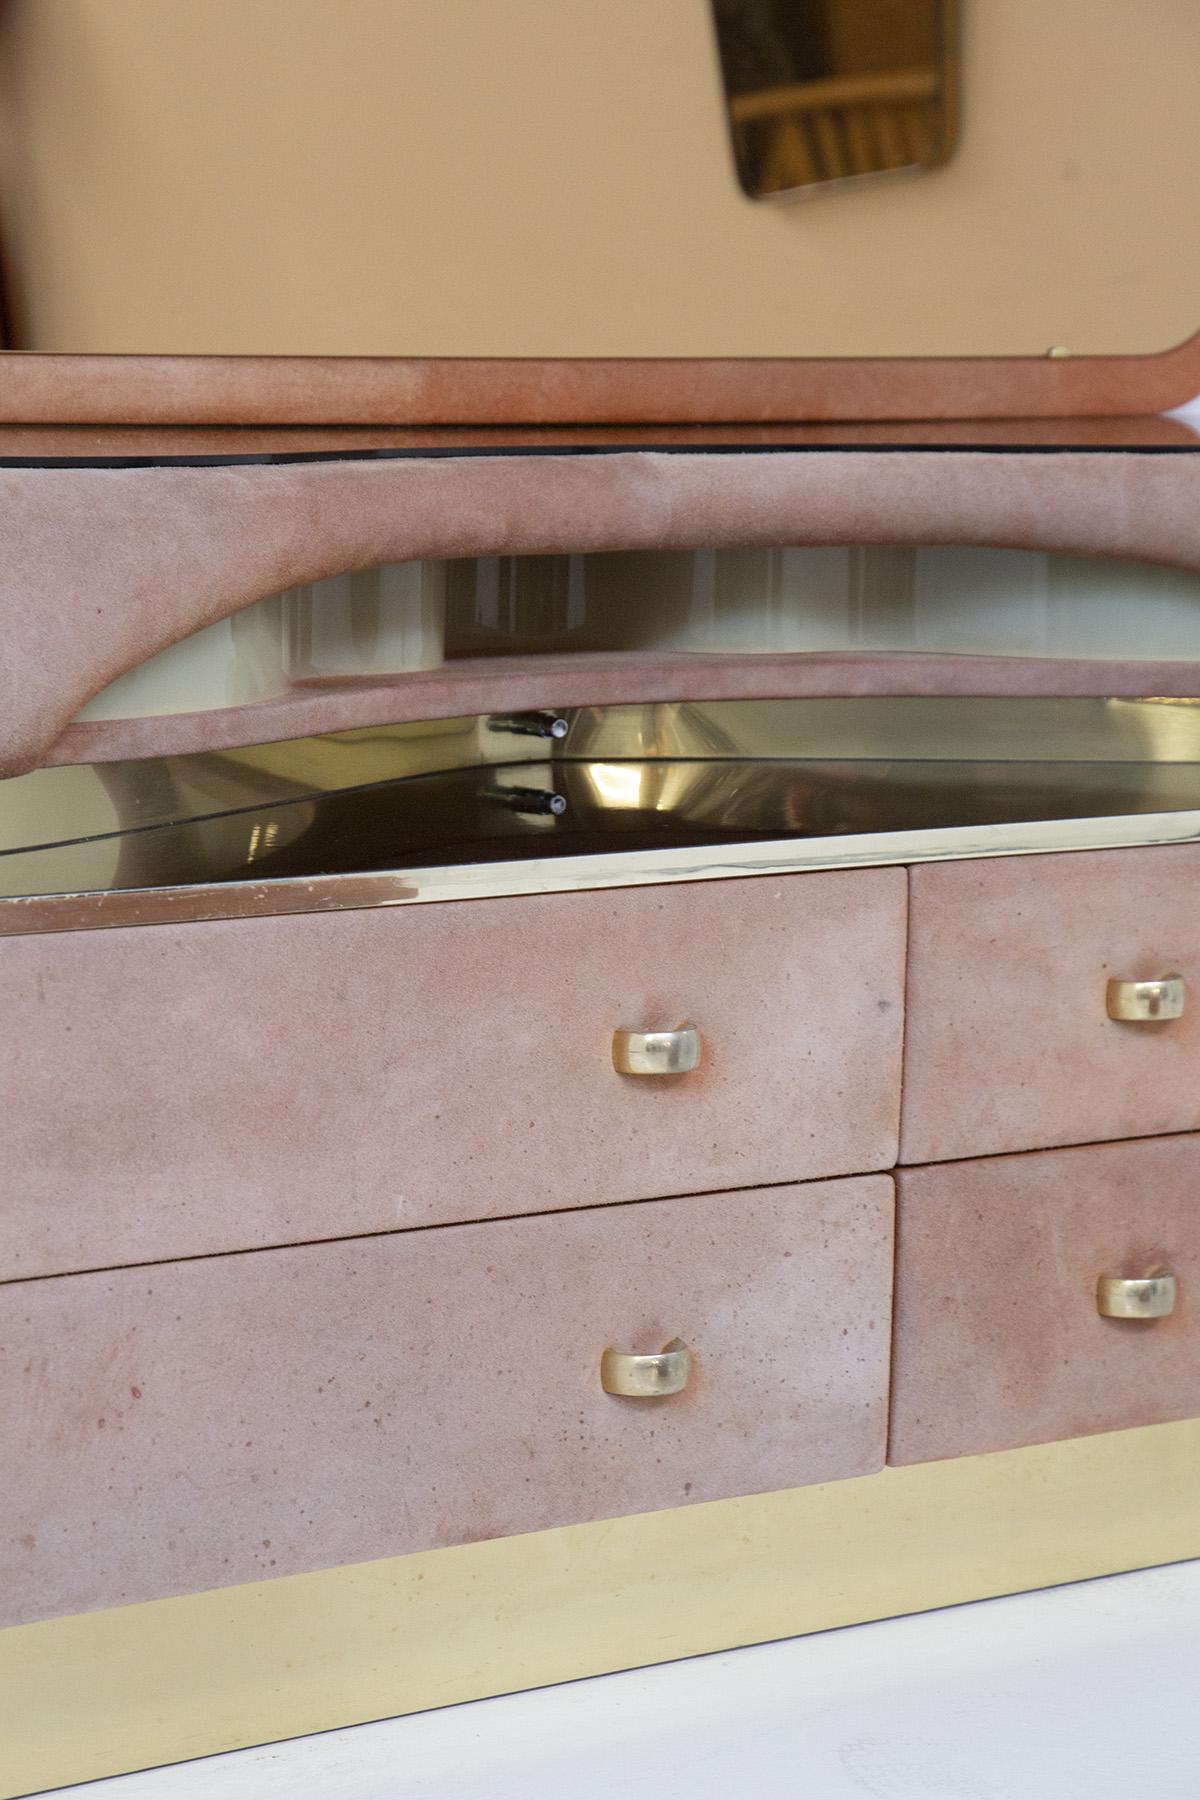 Wonderful women's makeup toilet made of brass and velvet, from the 1970s, Italian manufacture.
The structure is very curvy made of brass. The underside is a chest of drawers in pink, with 4 large drawers. Above is a sinuous brass top with built-in